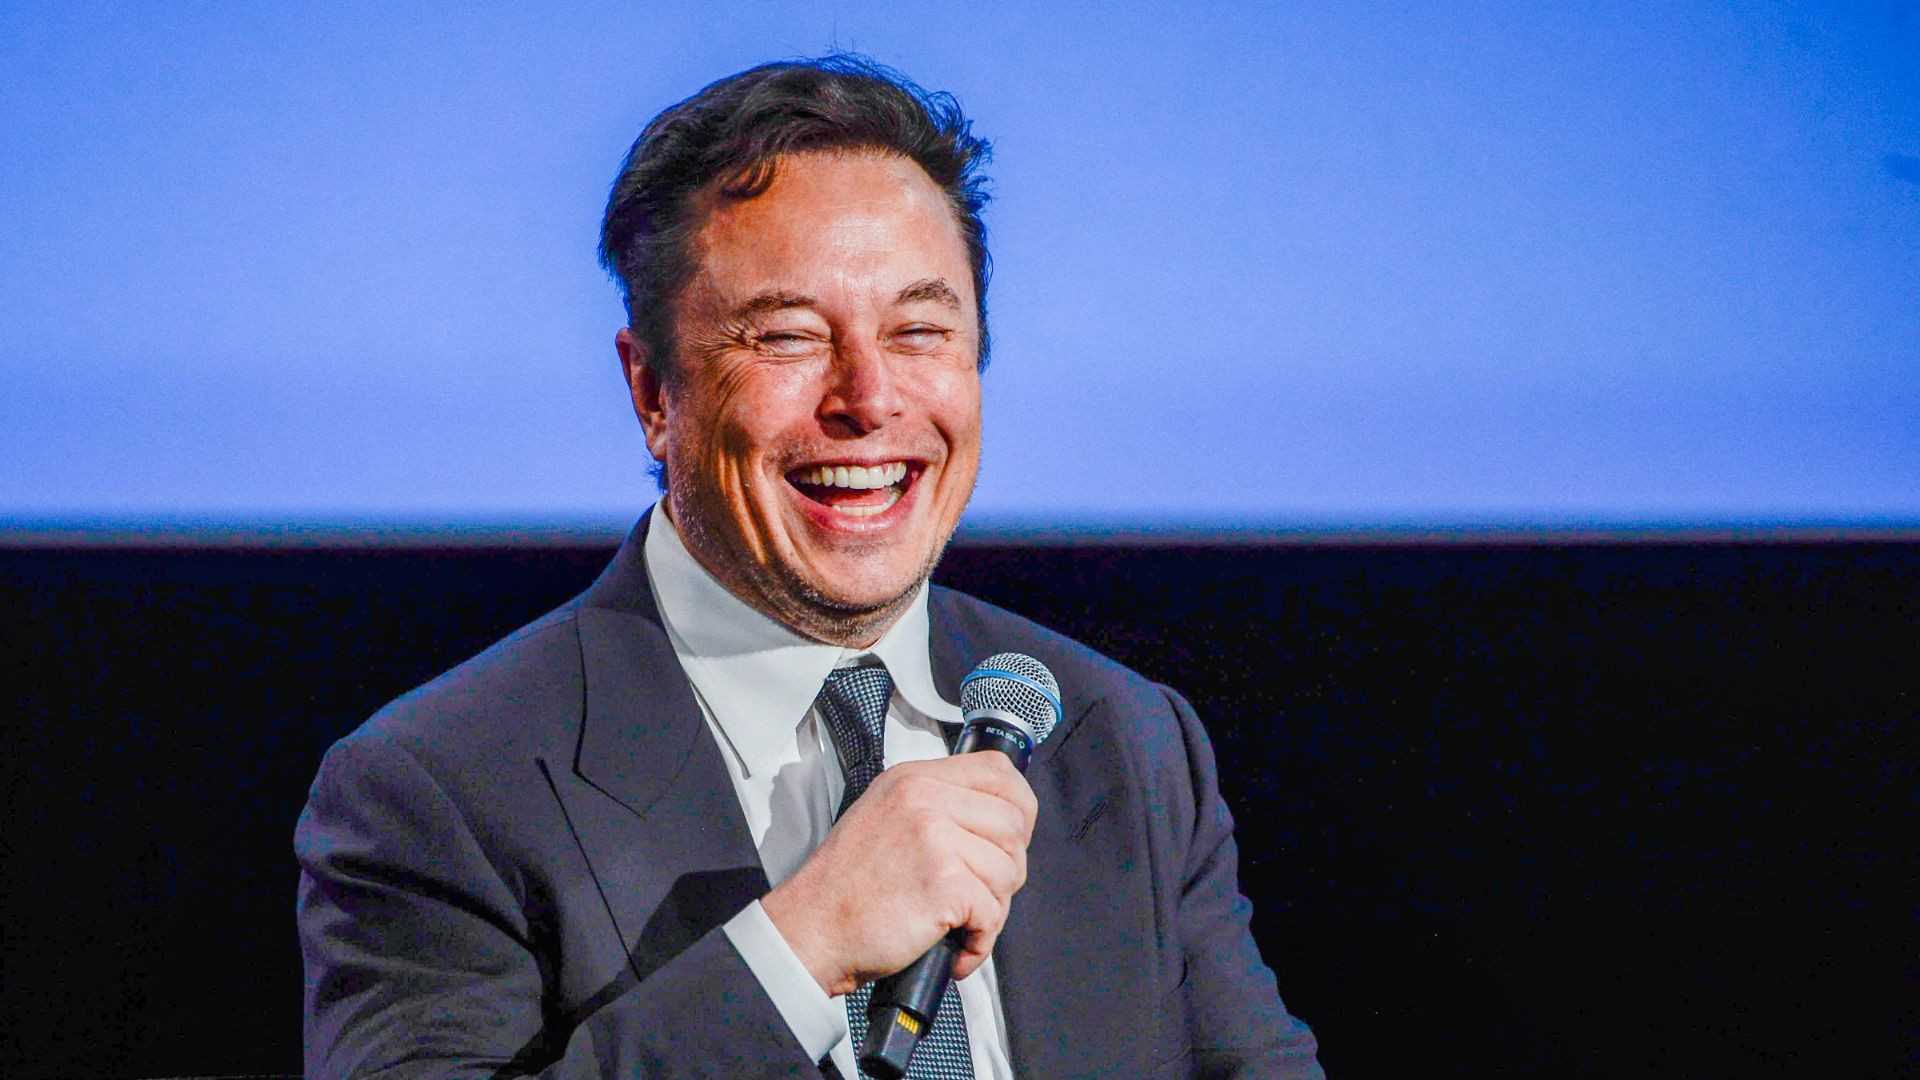 Elon Musk Sounds the Alarm Could America's Spending Lead to Bankruptcy What It Means for You----